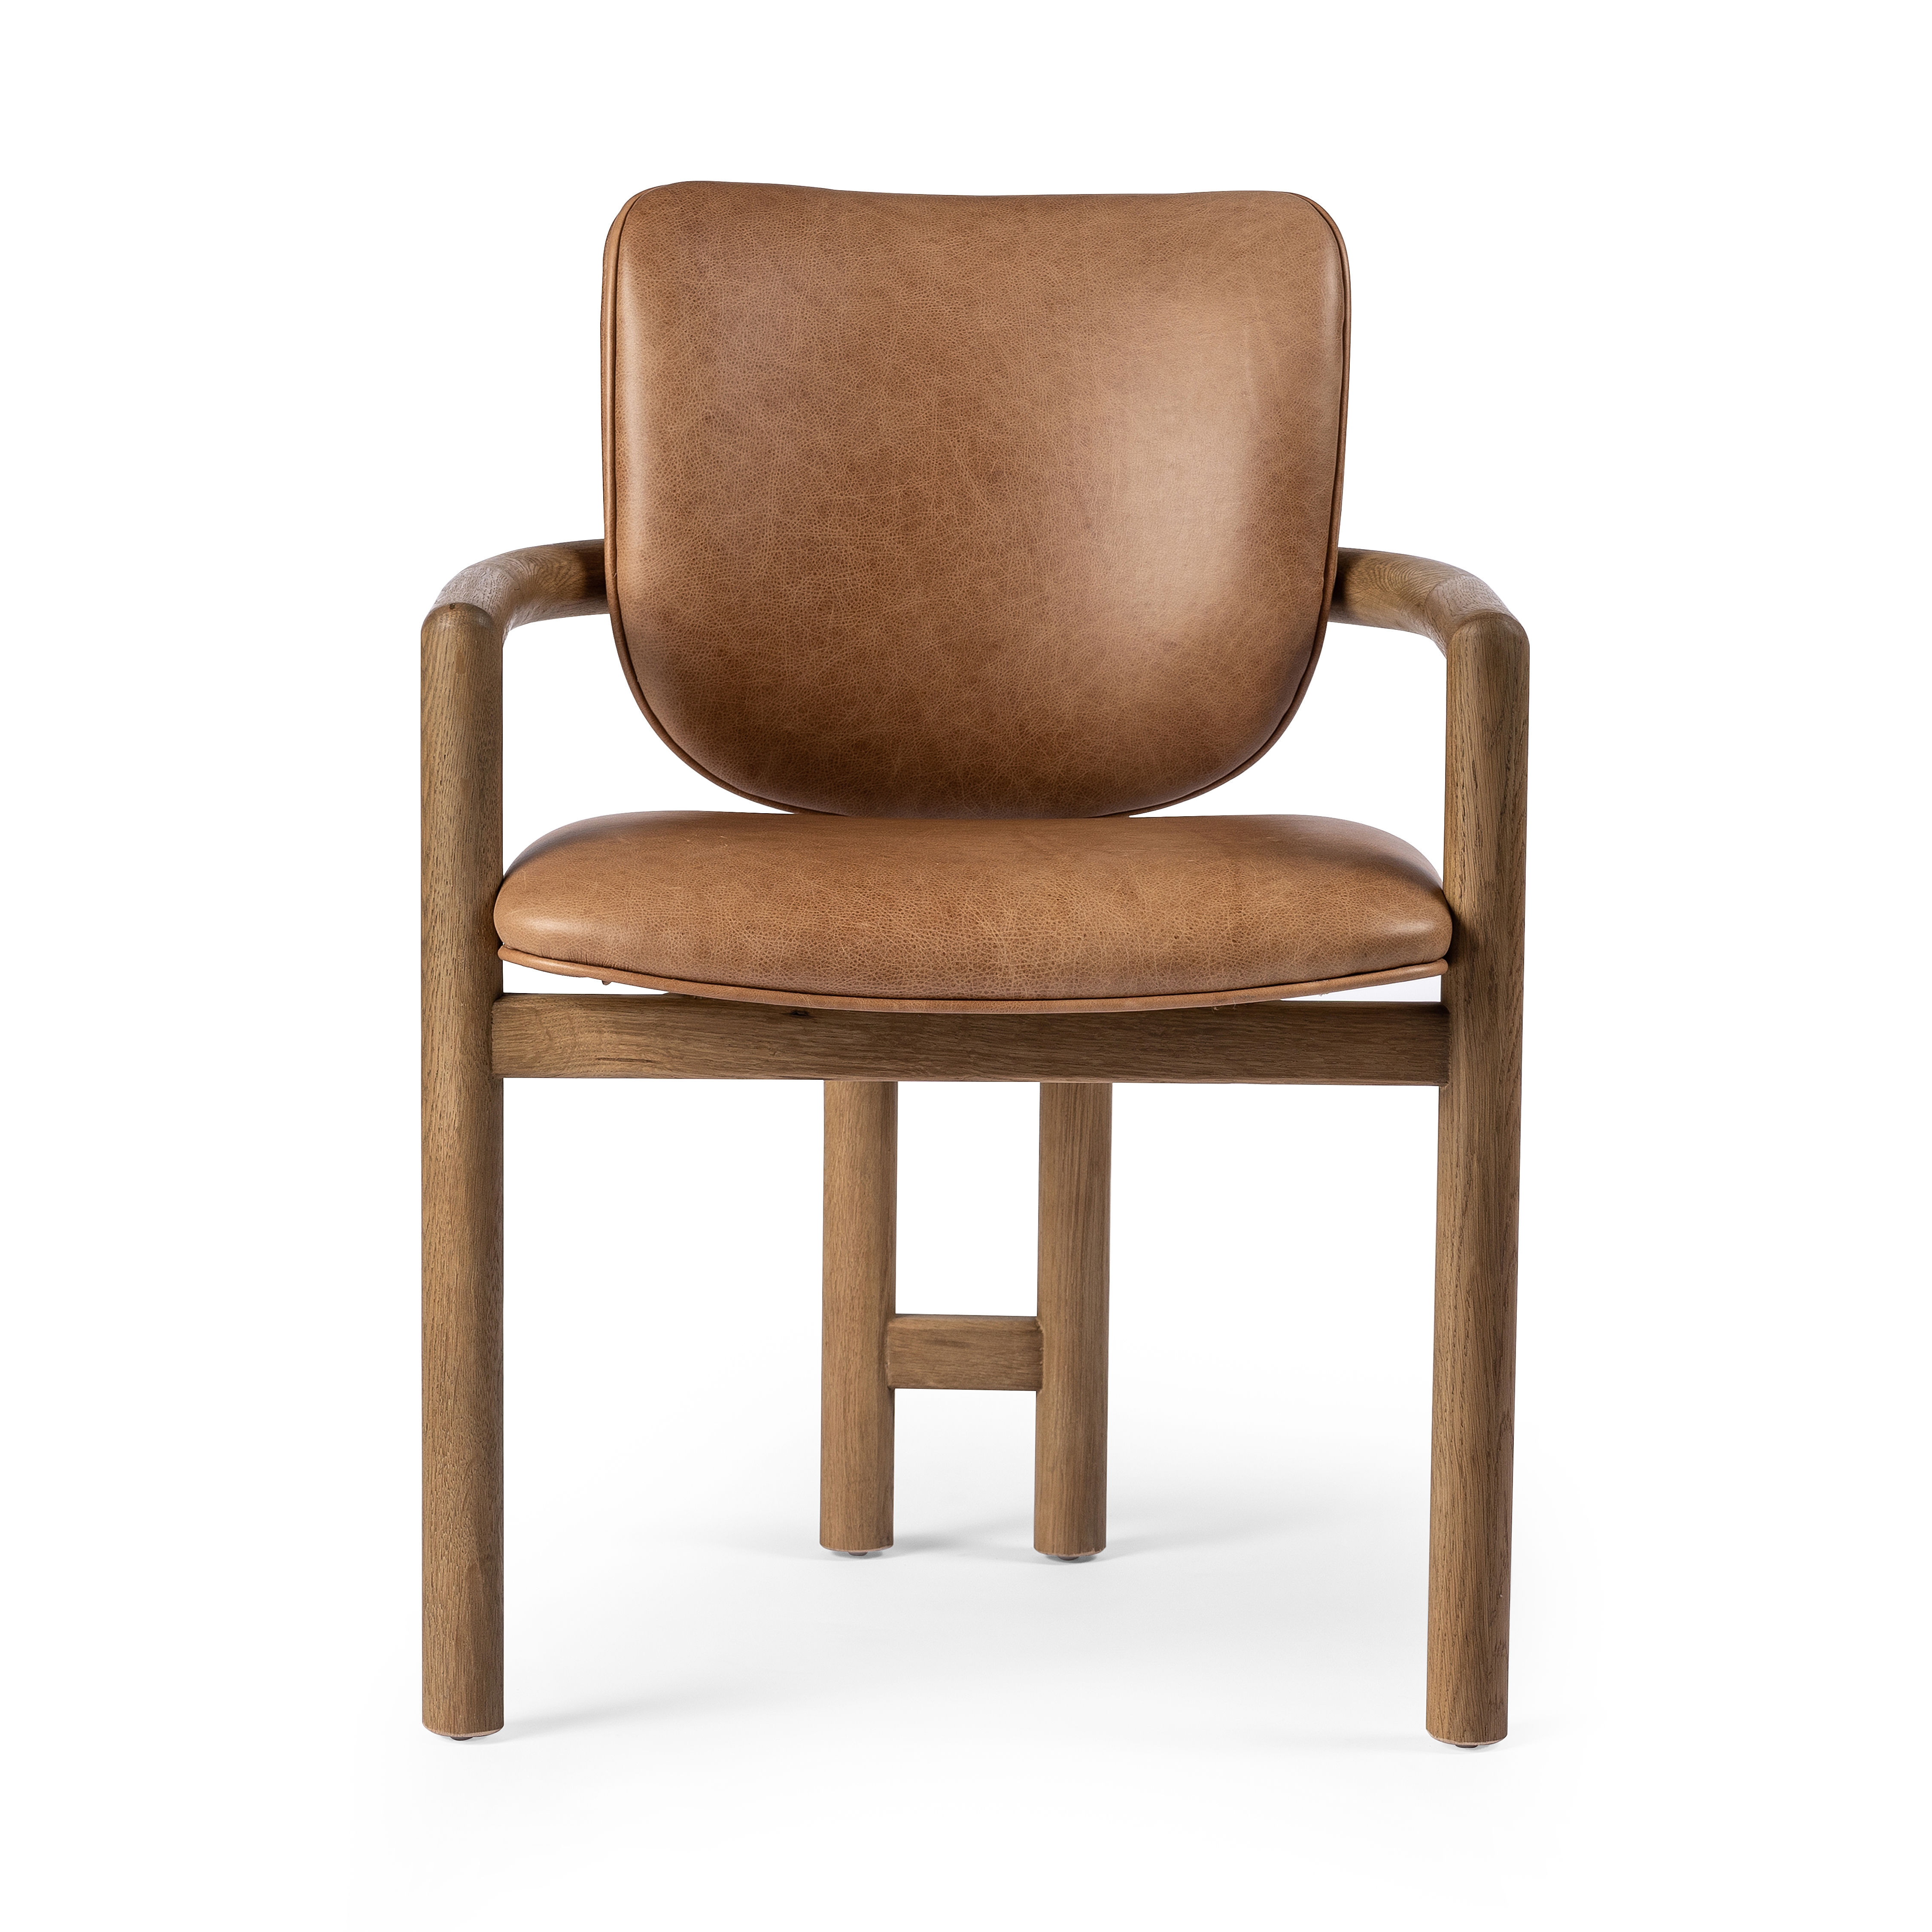 Madeira Dining Chair-Chaps Saddle - Image 3